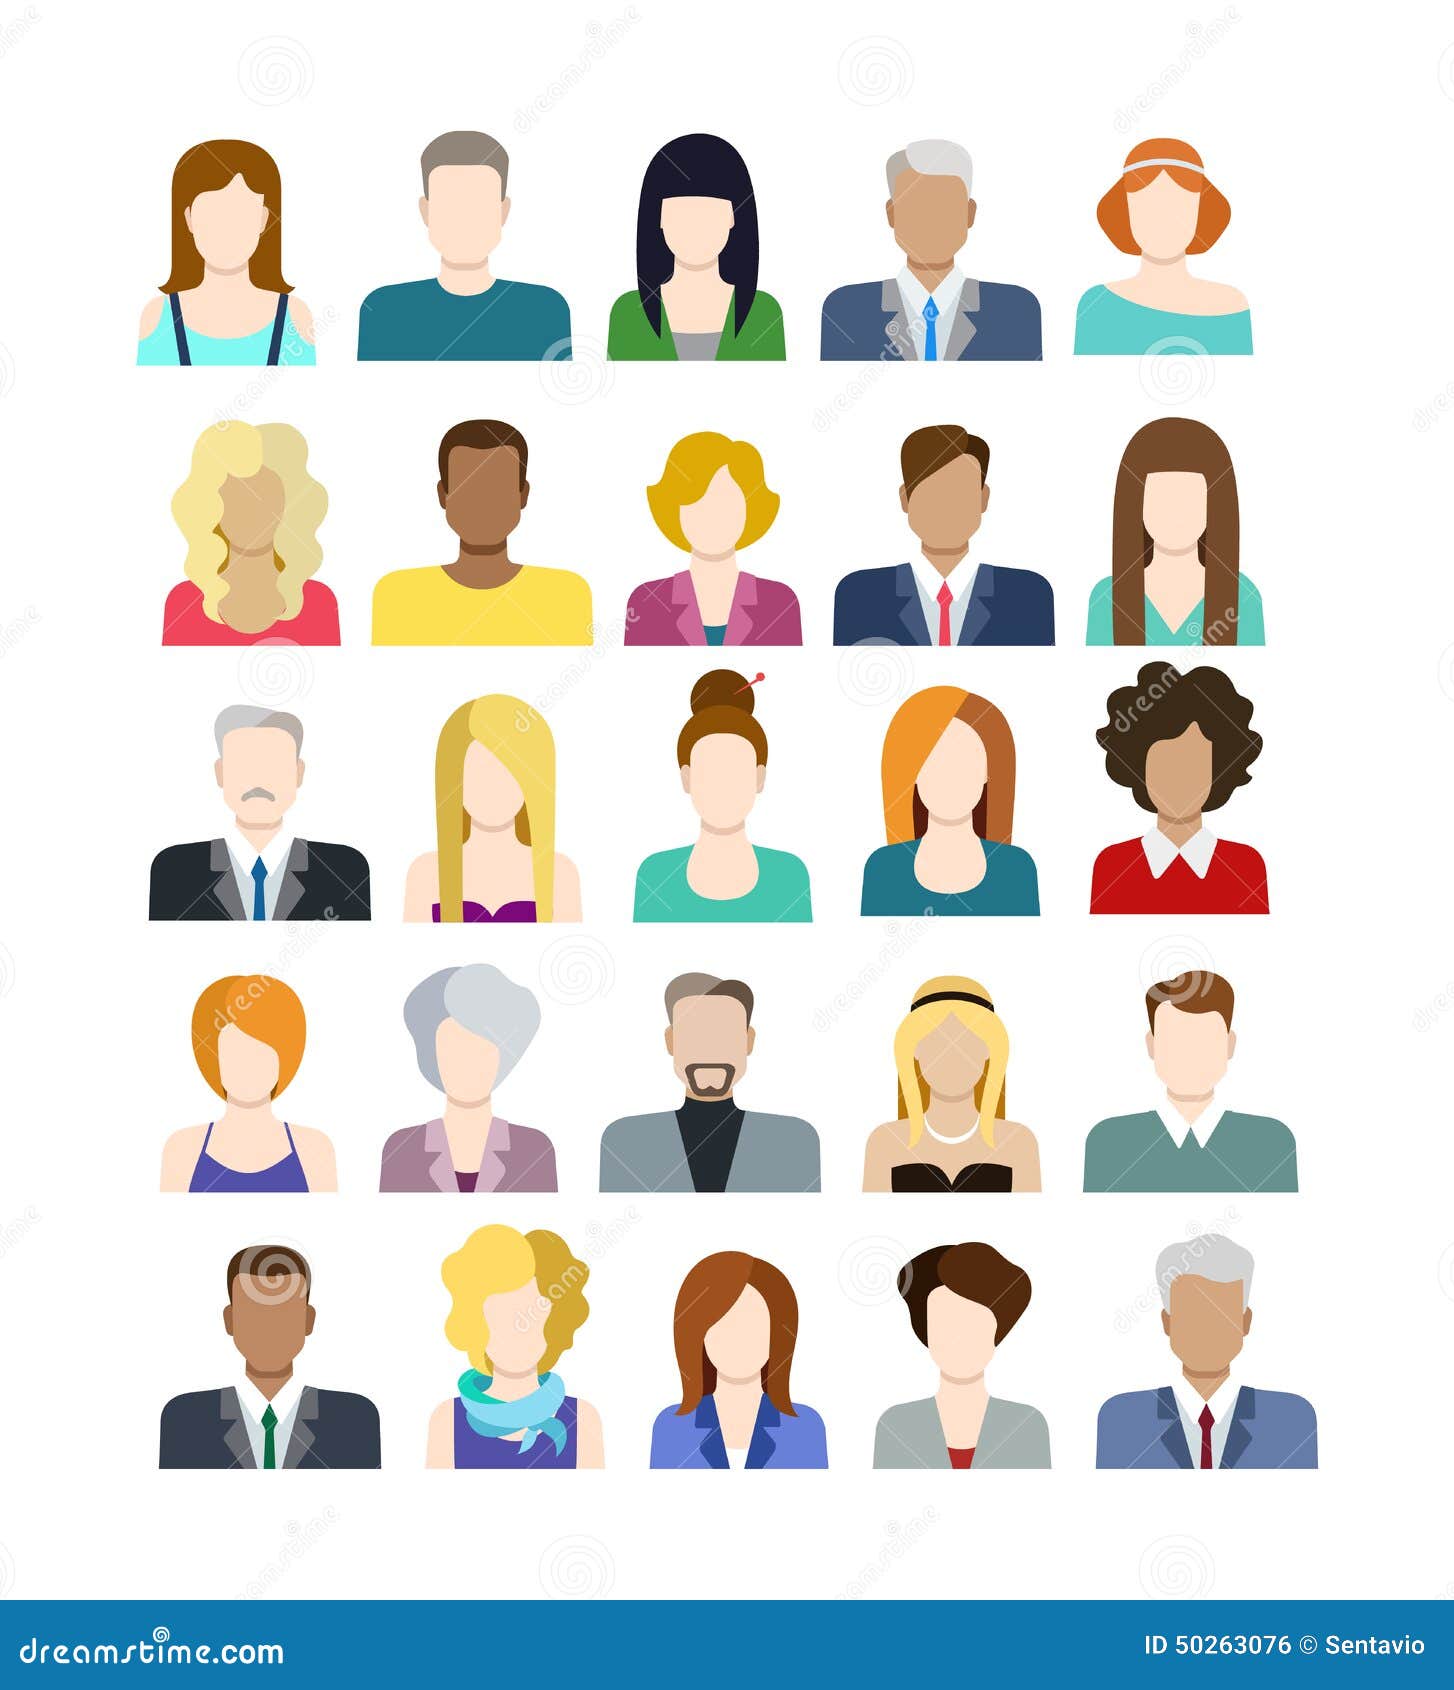 set of people icons in flat style with faces